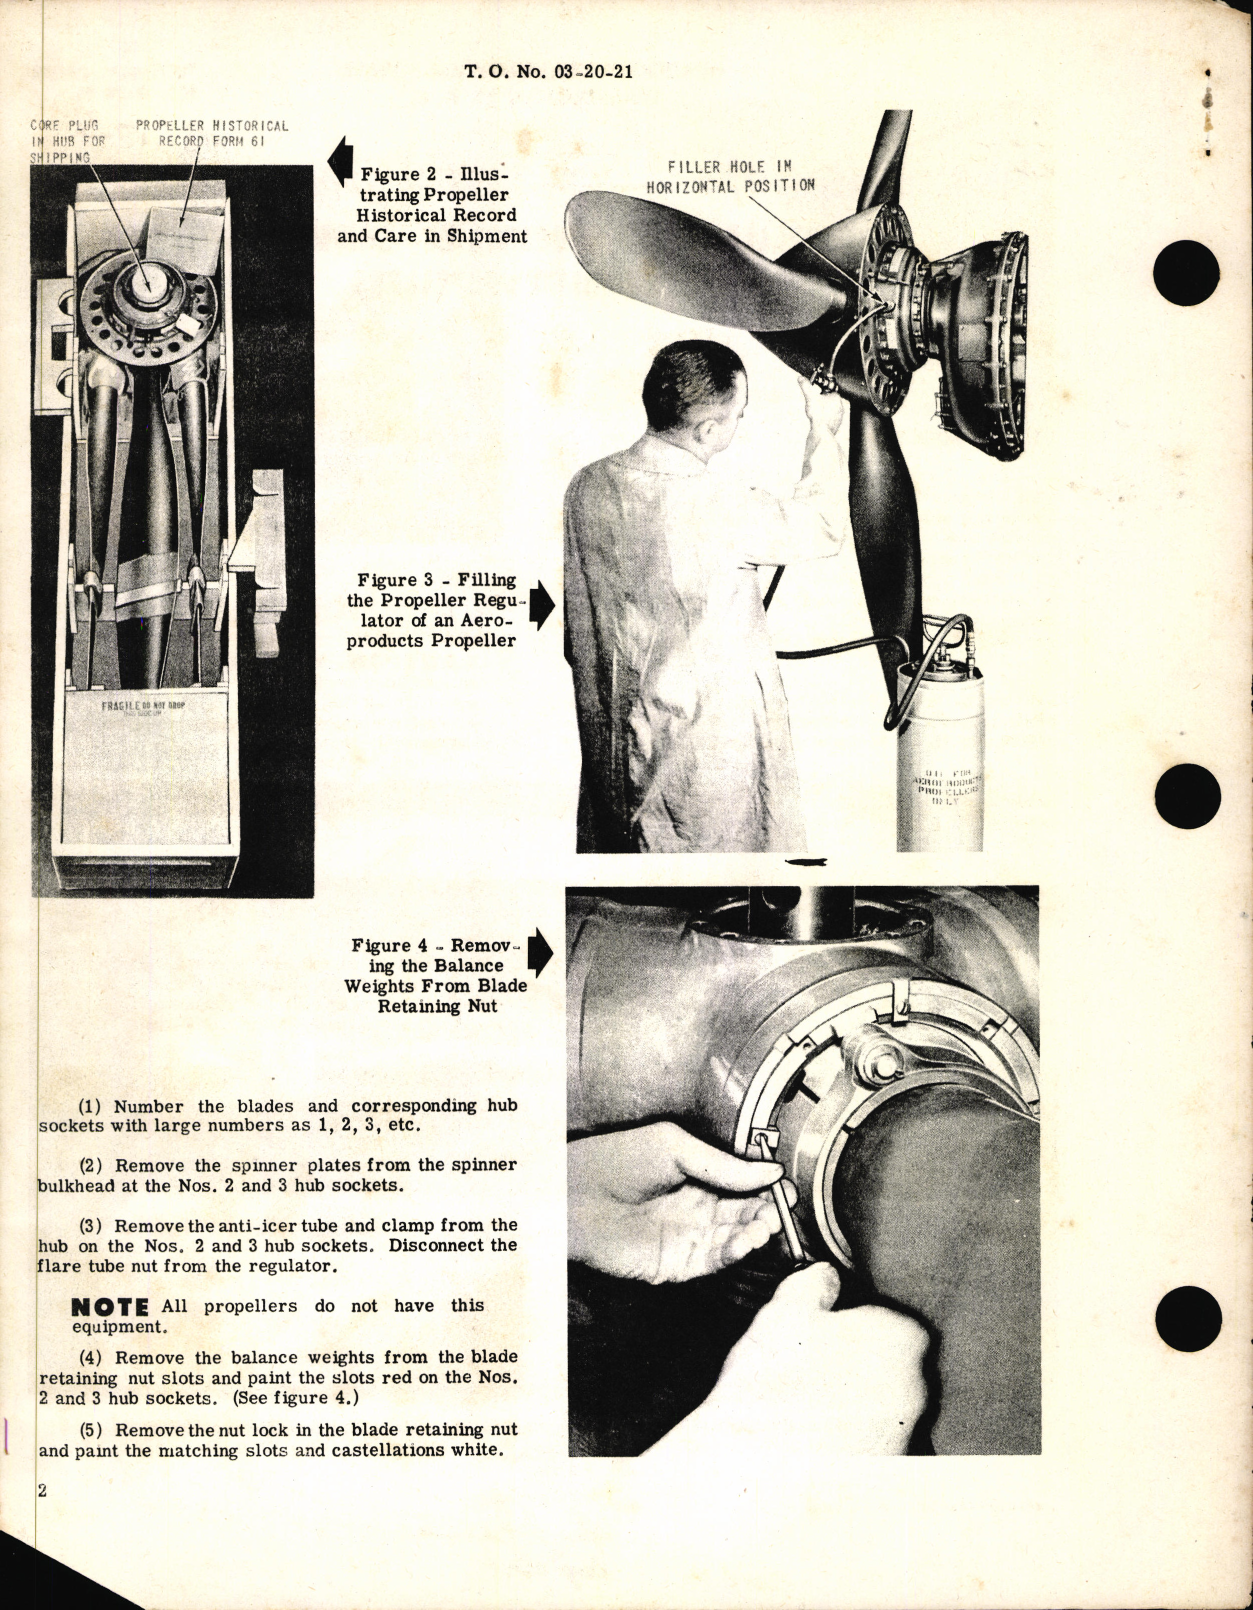 Sample page 2 from AirCorps Library document: Propellers and Accessories - Shipment of Disassembled Propellers 